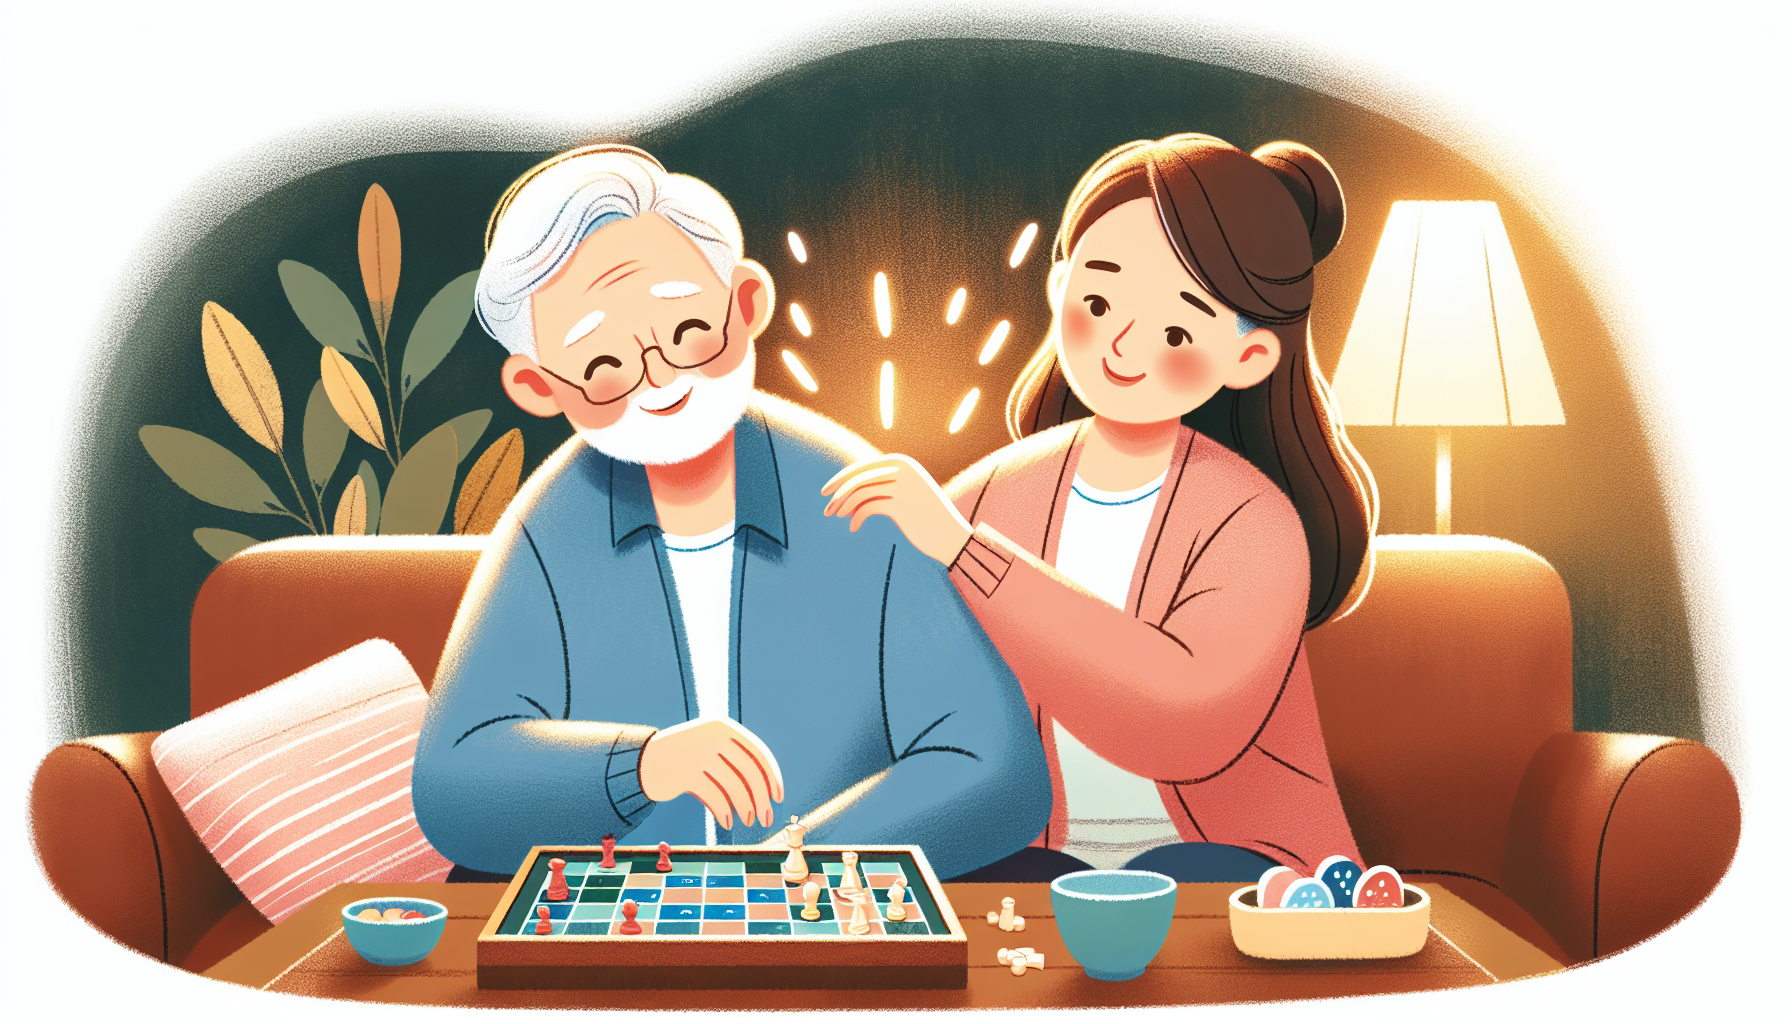 Care companion and senior playing a board game